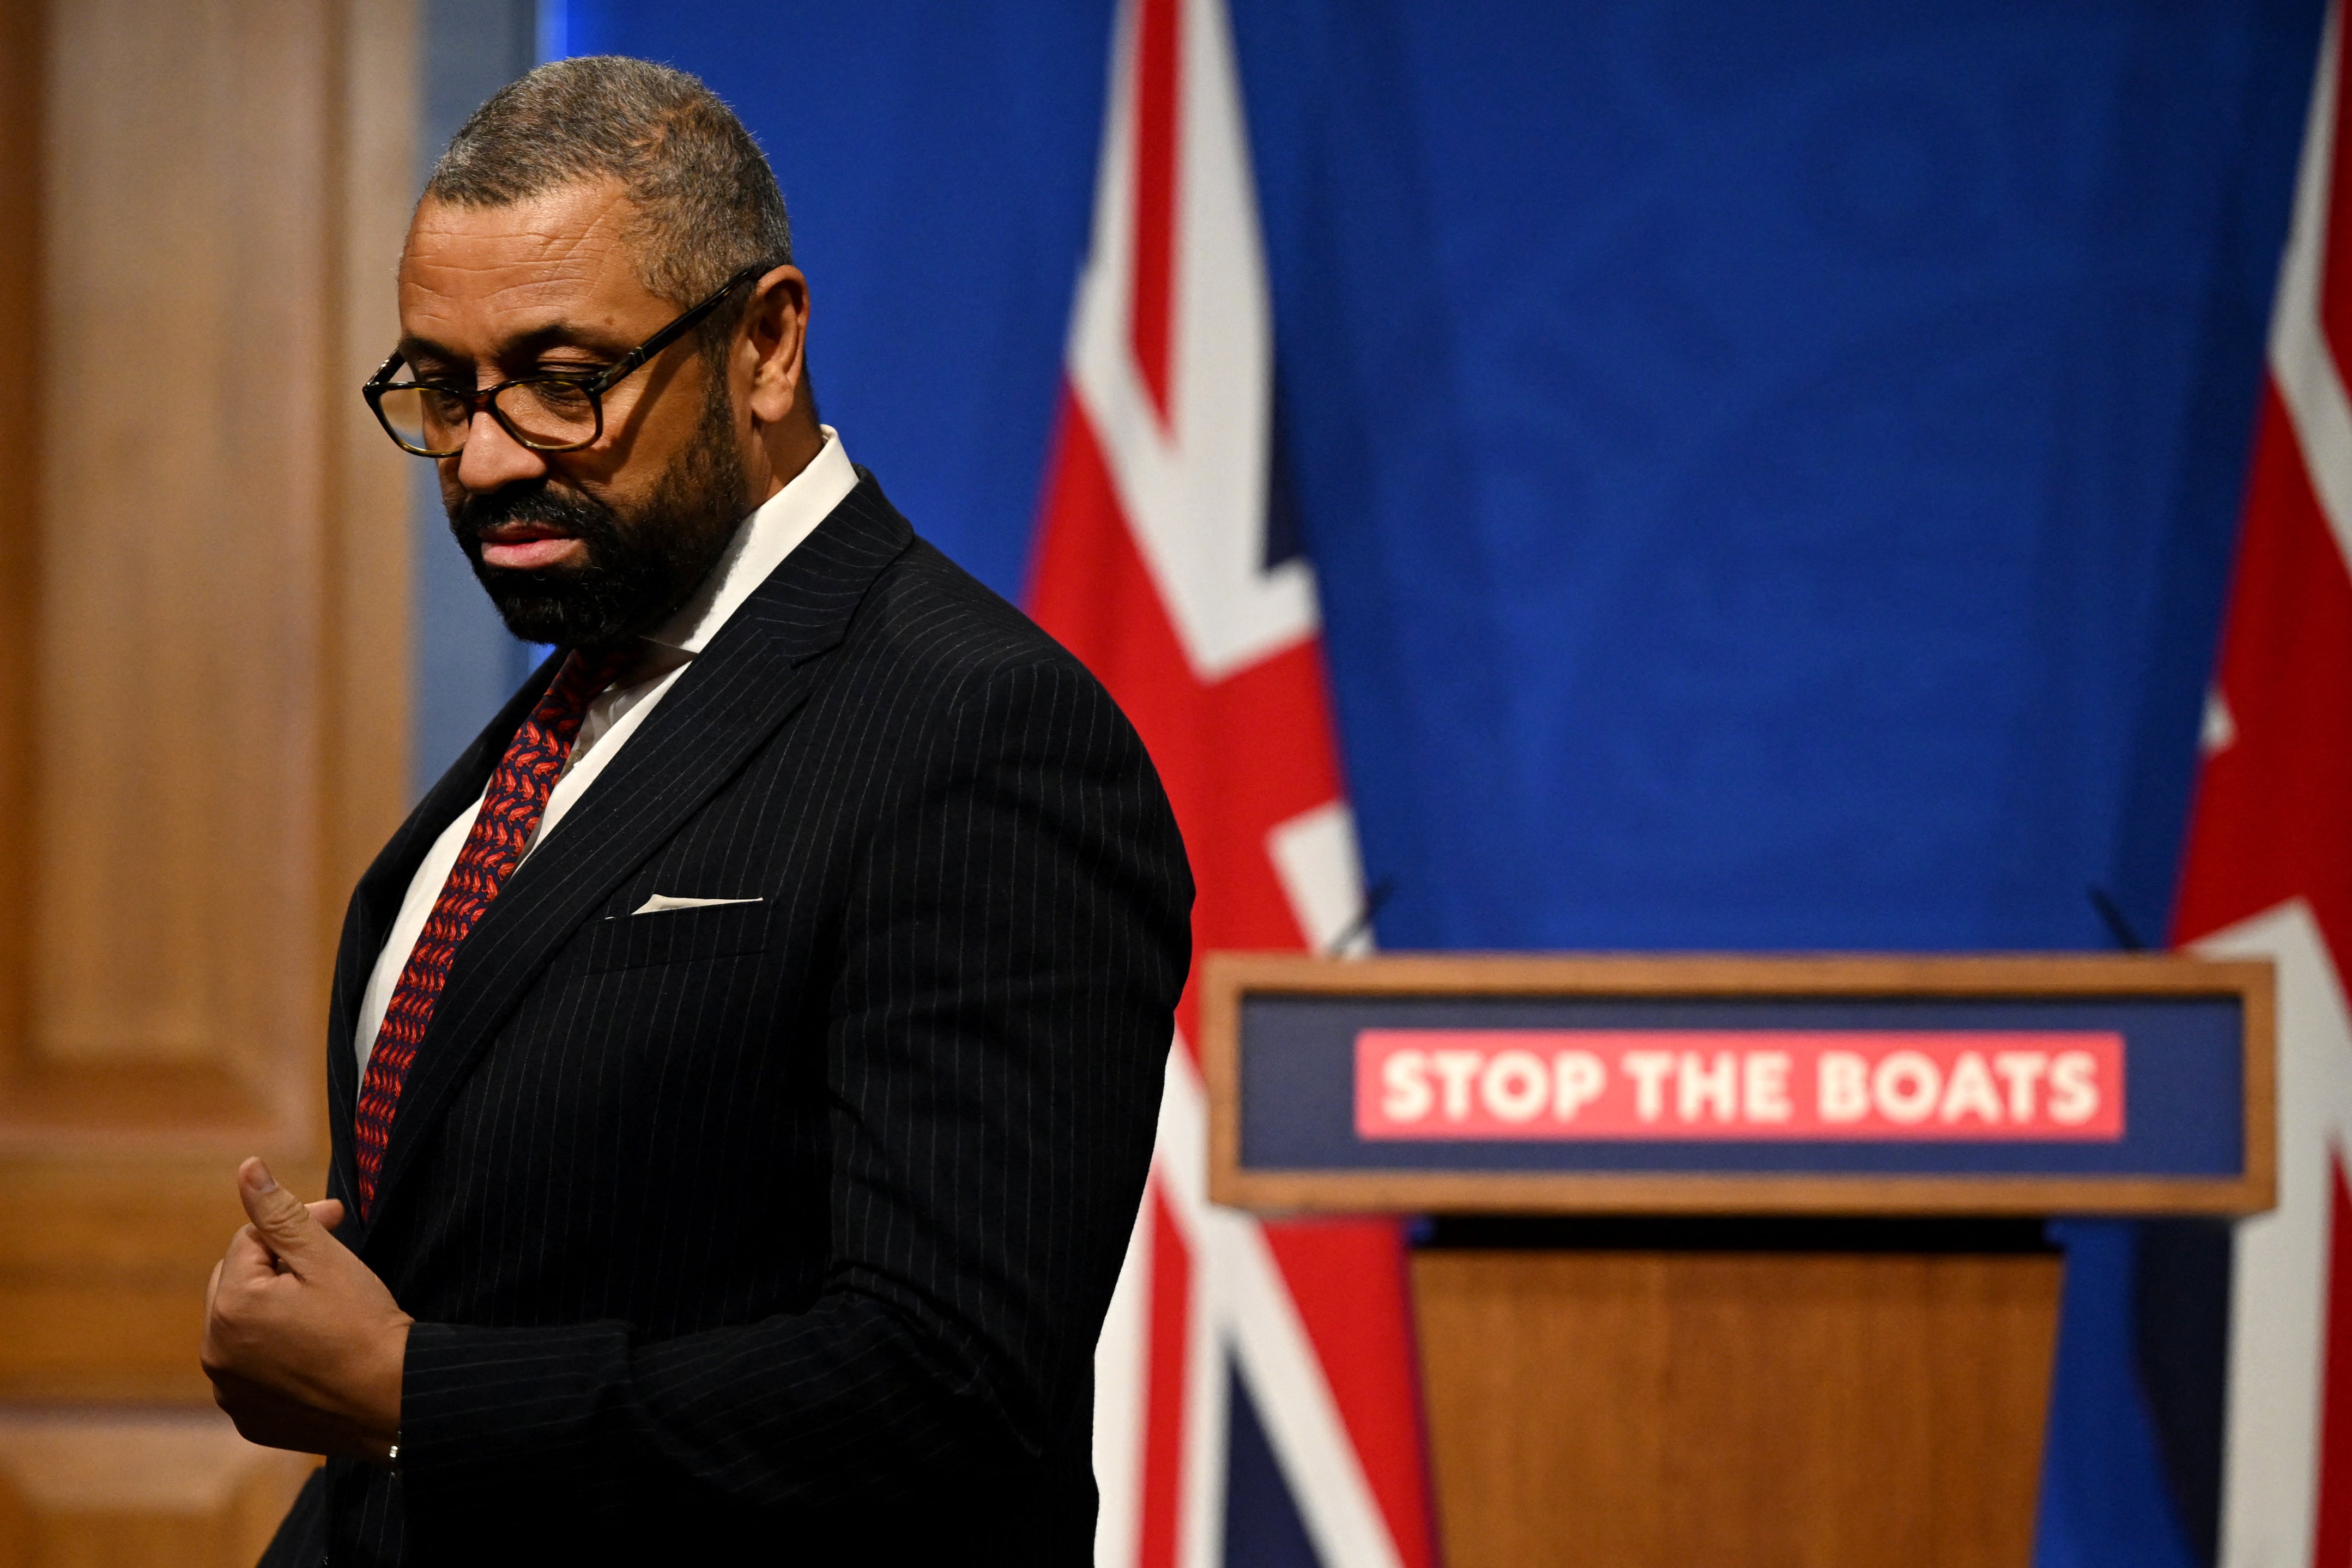 James Cleverly says students bringing family members to the UK is ‘unreasonable’